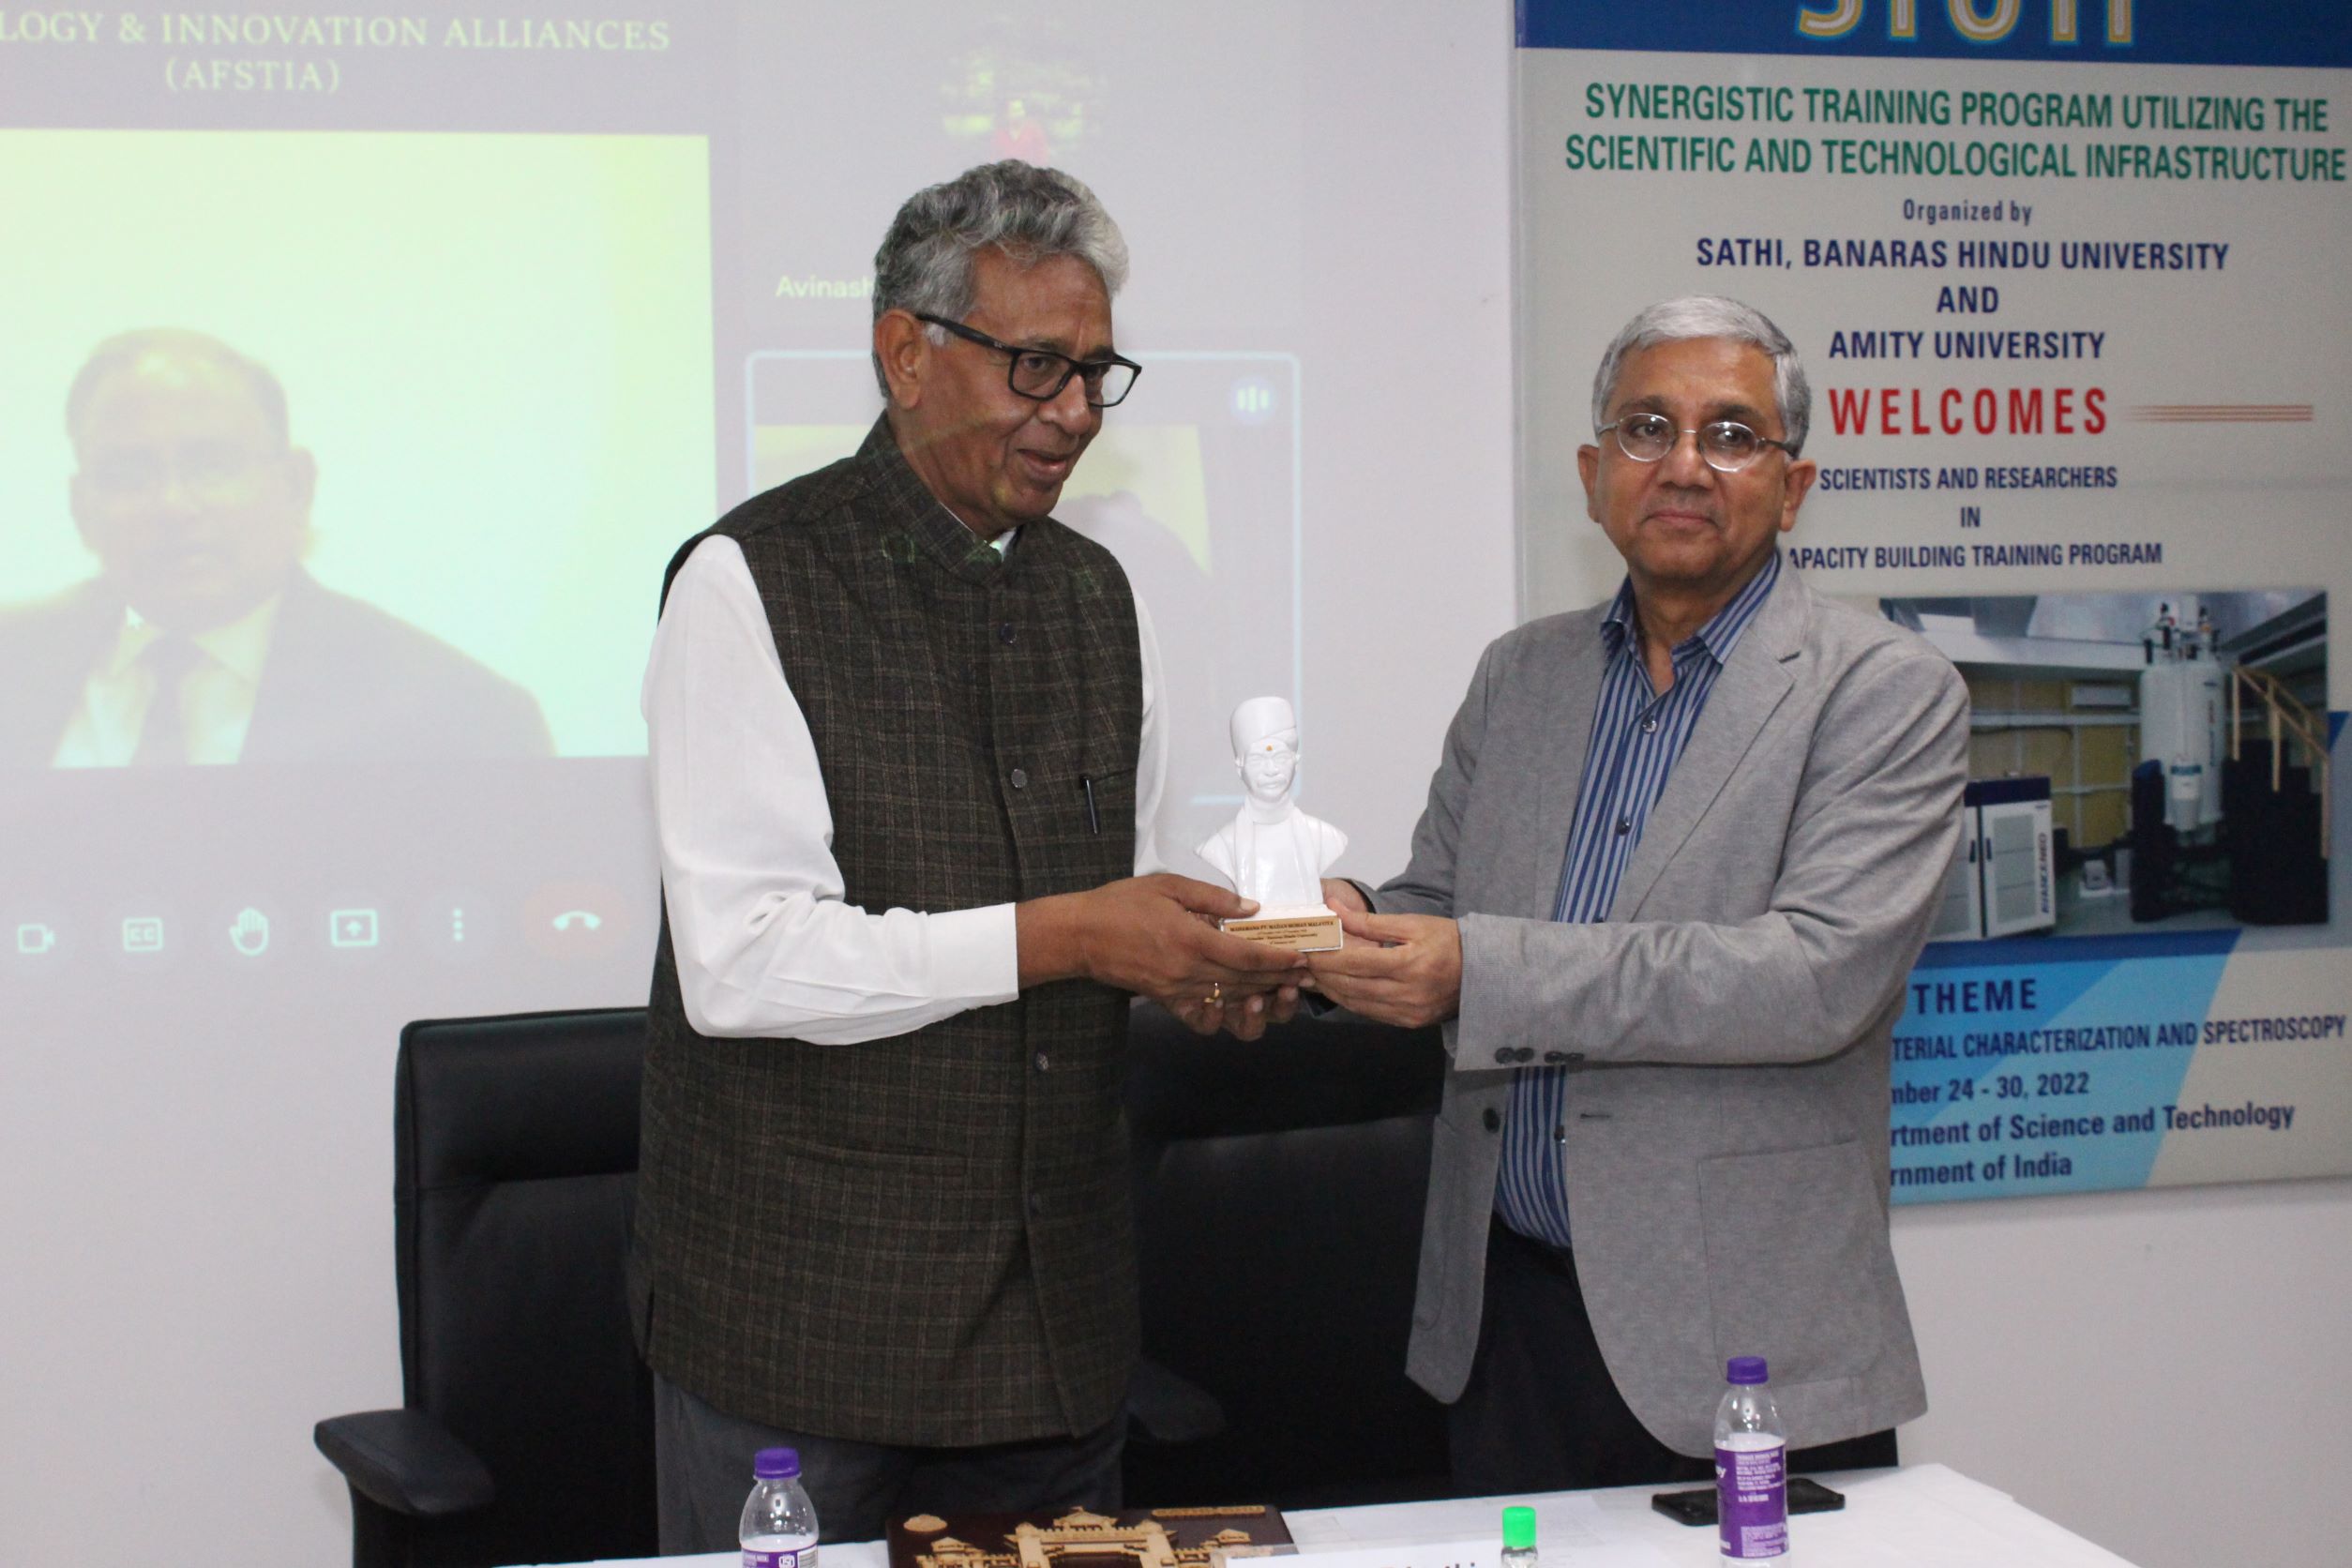 Chief Guest - Dr. Mangala Rai, Former DG, Indian Council of Agricultural Research (ICAR) with Prof. Anil K. Tripathi, Director, Institute of Science, Banaras Hindu University 